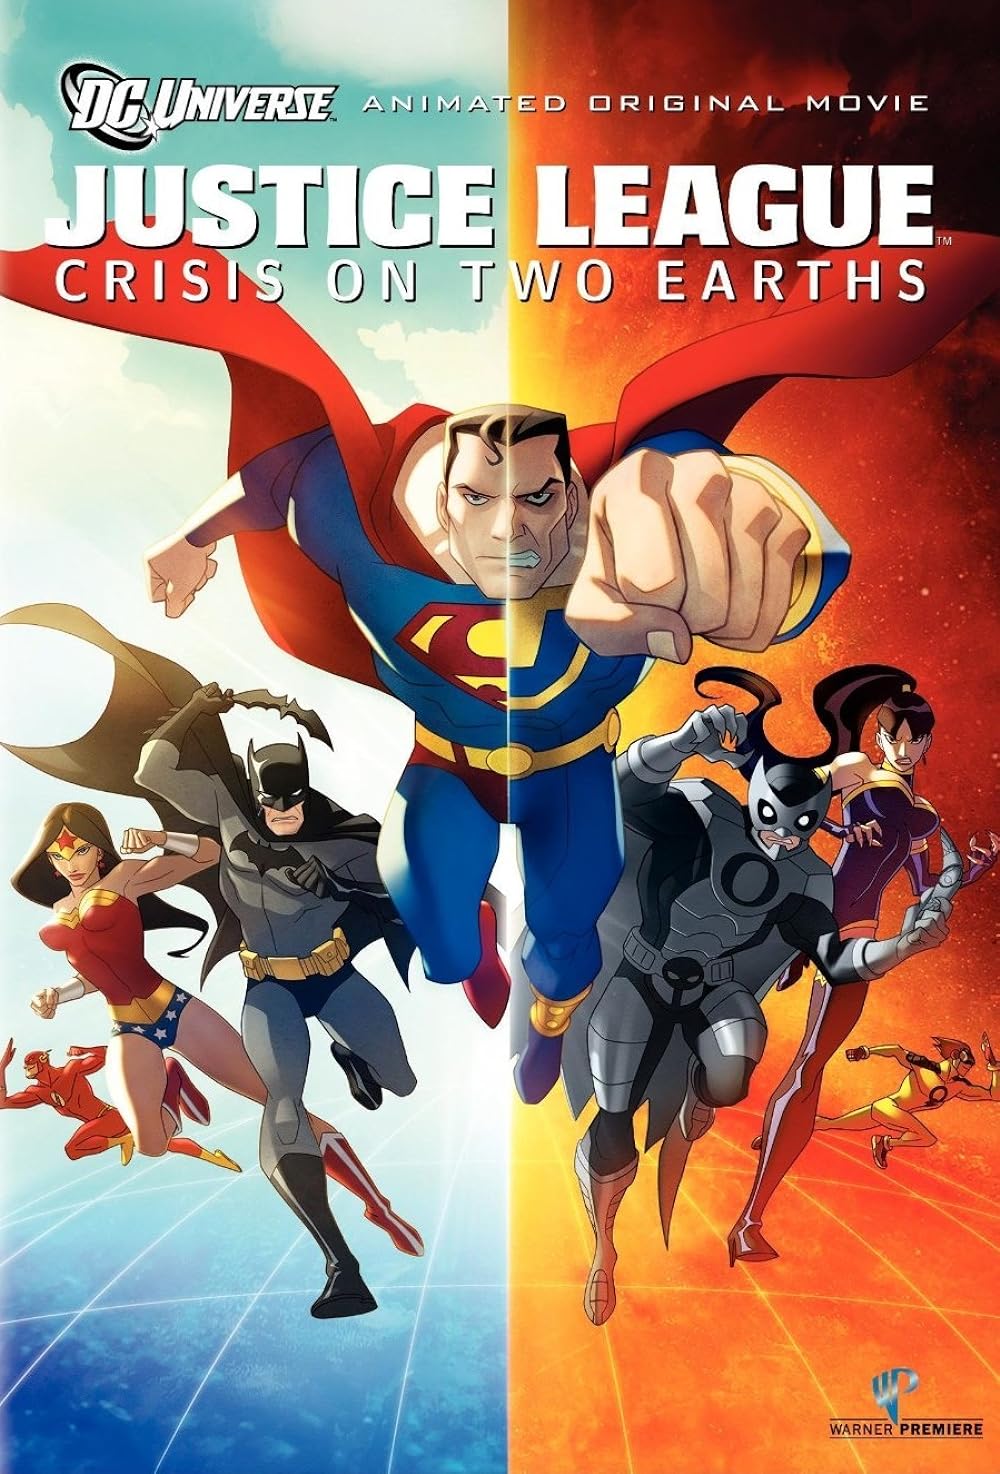 FULL MOVIE: Justice League: Crisis On Two Earths (2010)